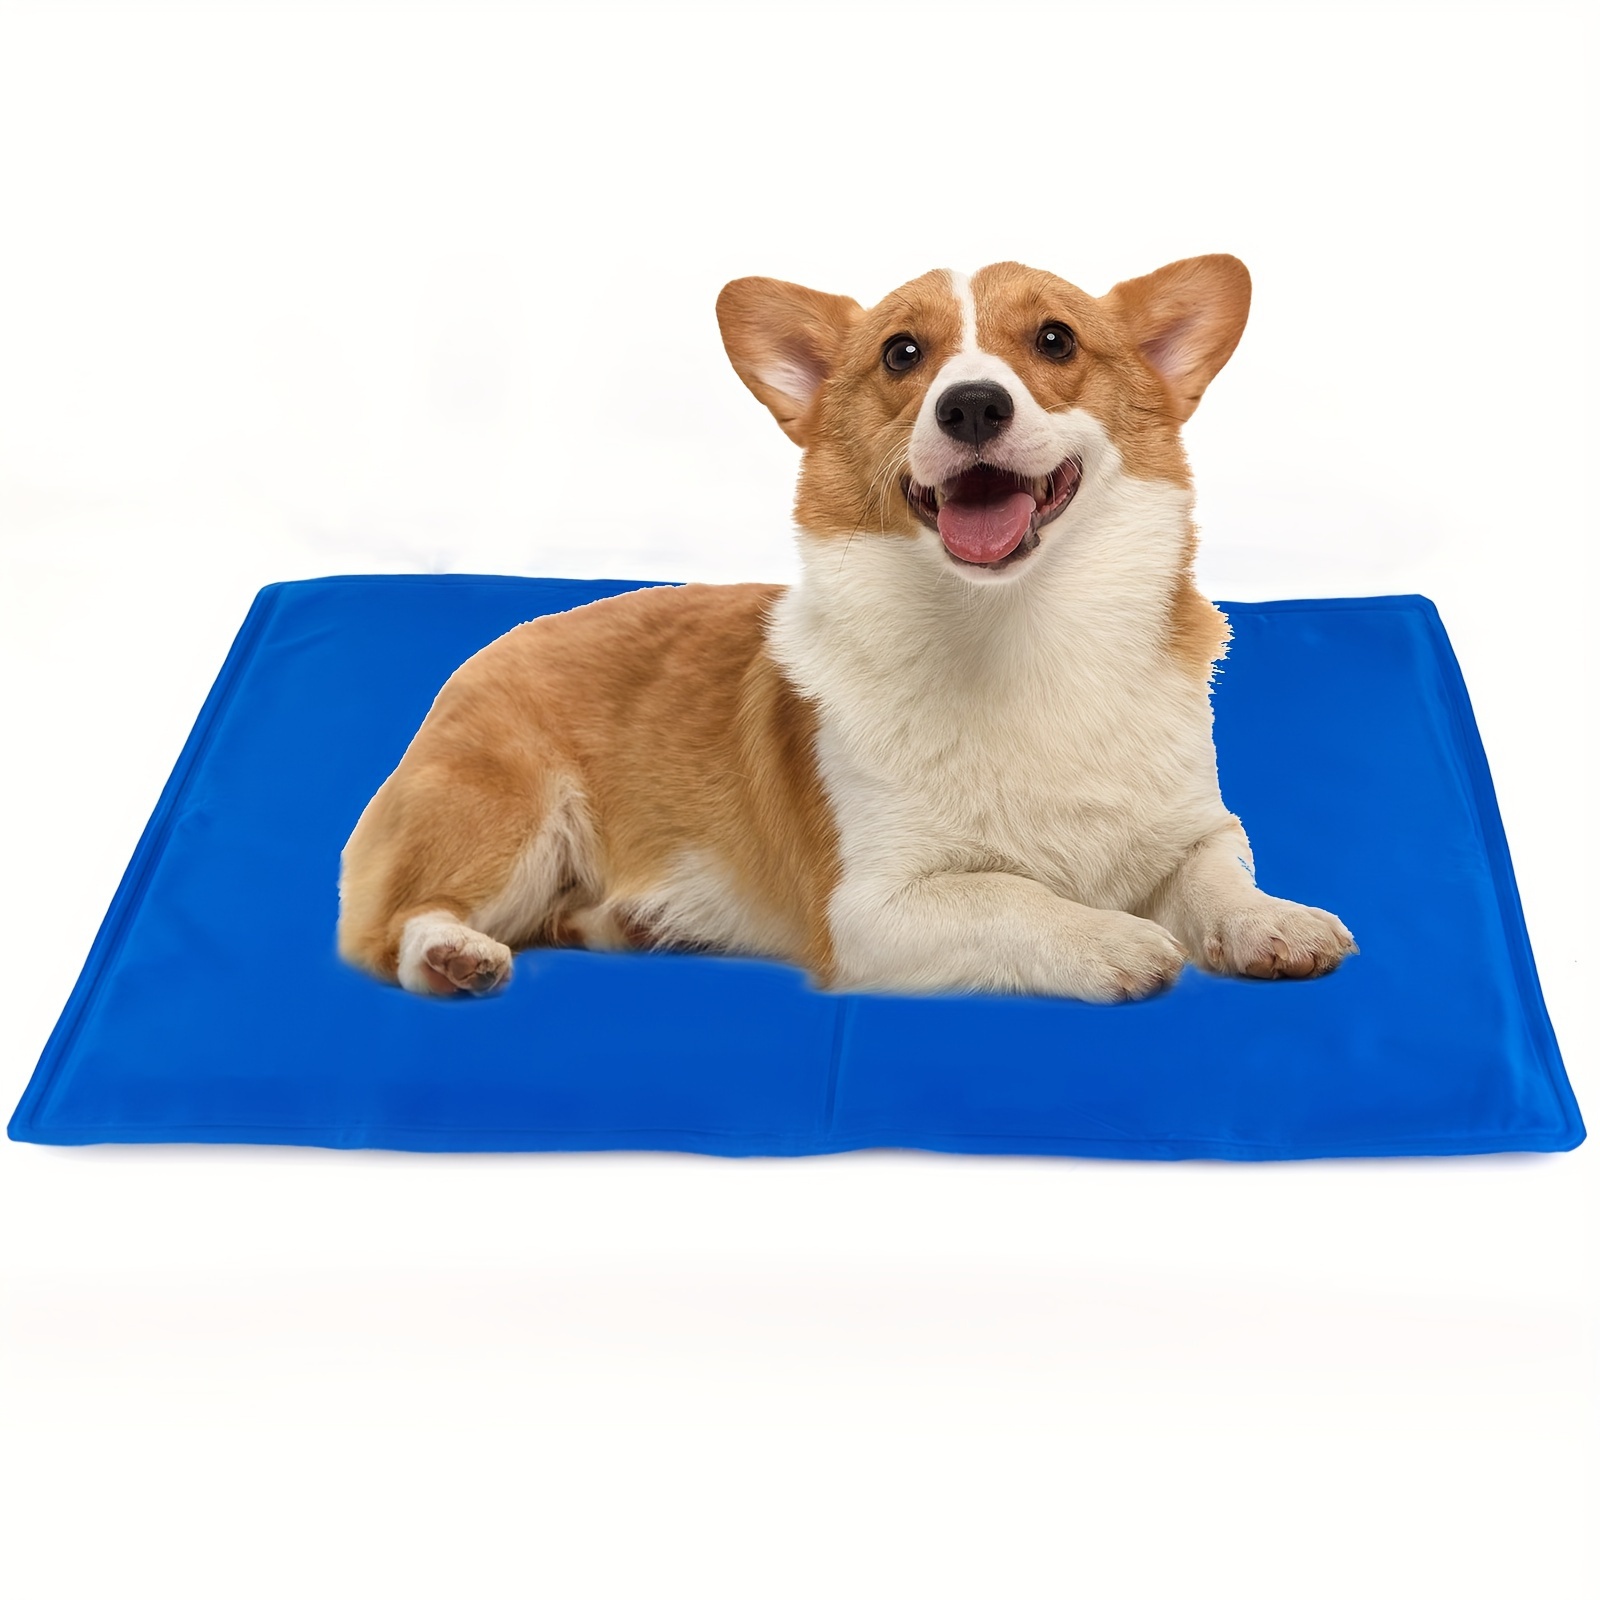 

Dog Cooling Mat Pet Cooling Pad For Dogs And Cats, No Water Or Cooling Required Non-toxic Gel